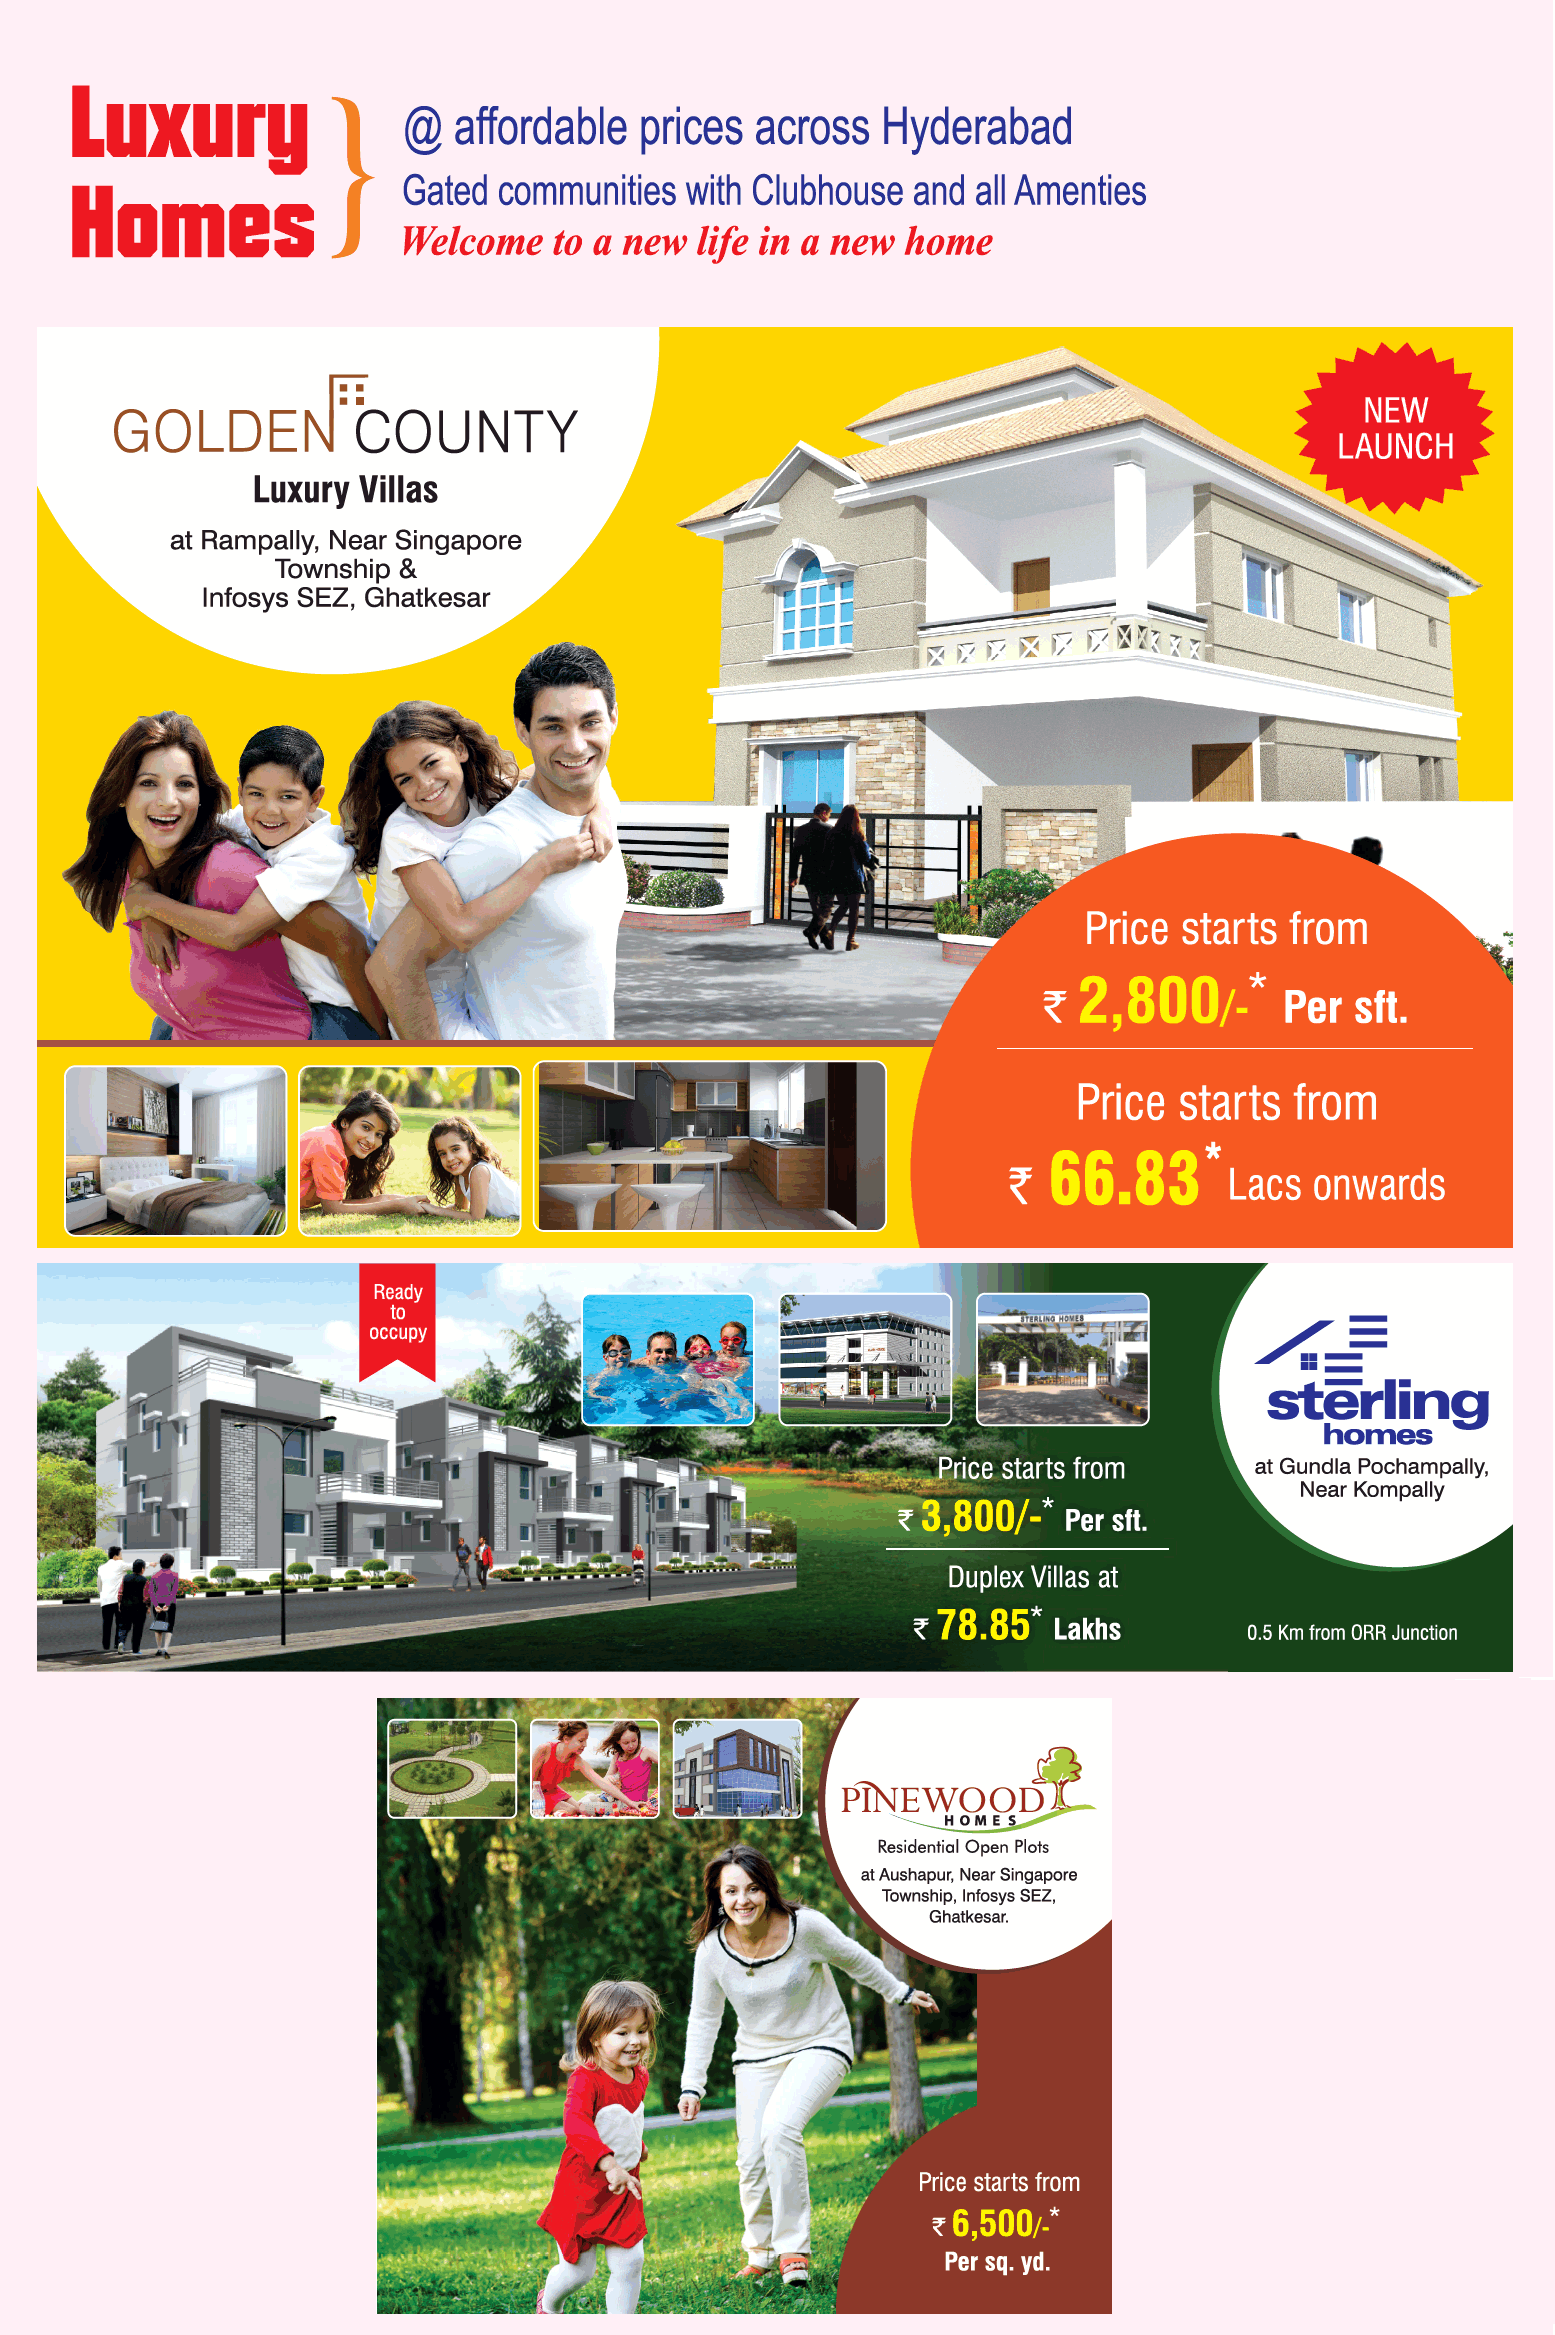 Reside in gated communities with clubhouse and all amenities at Modi Projects in Hyderabad Update